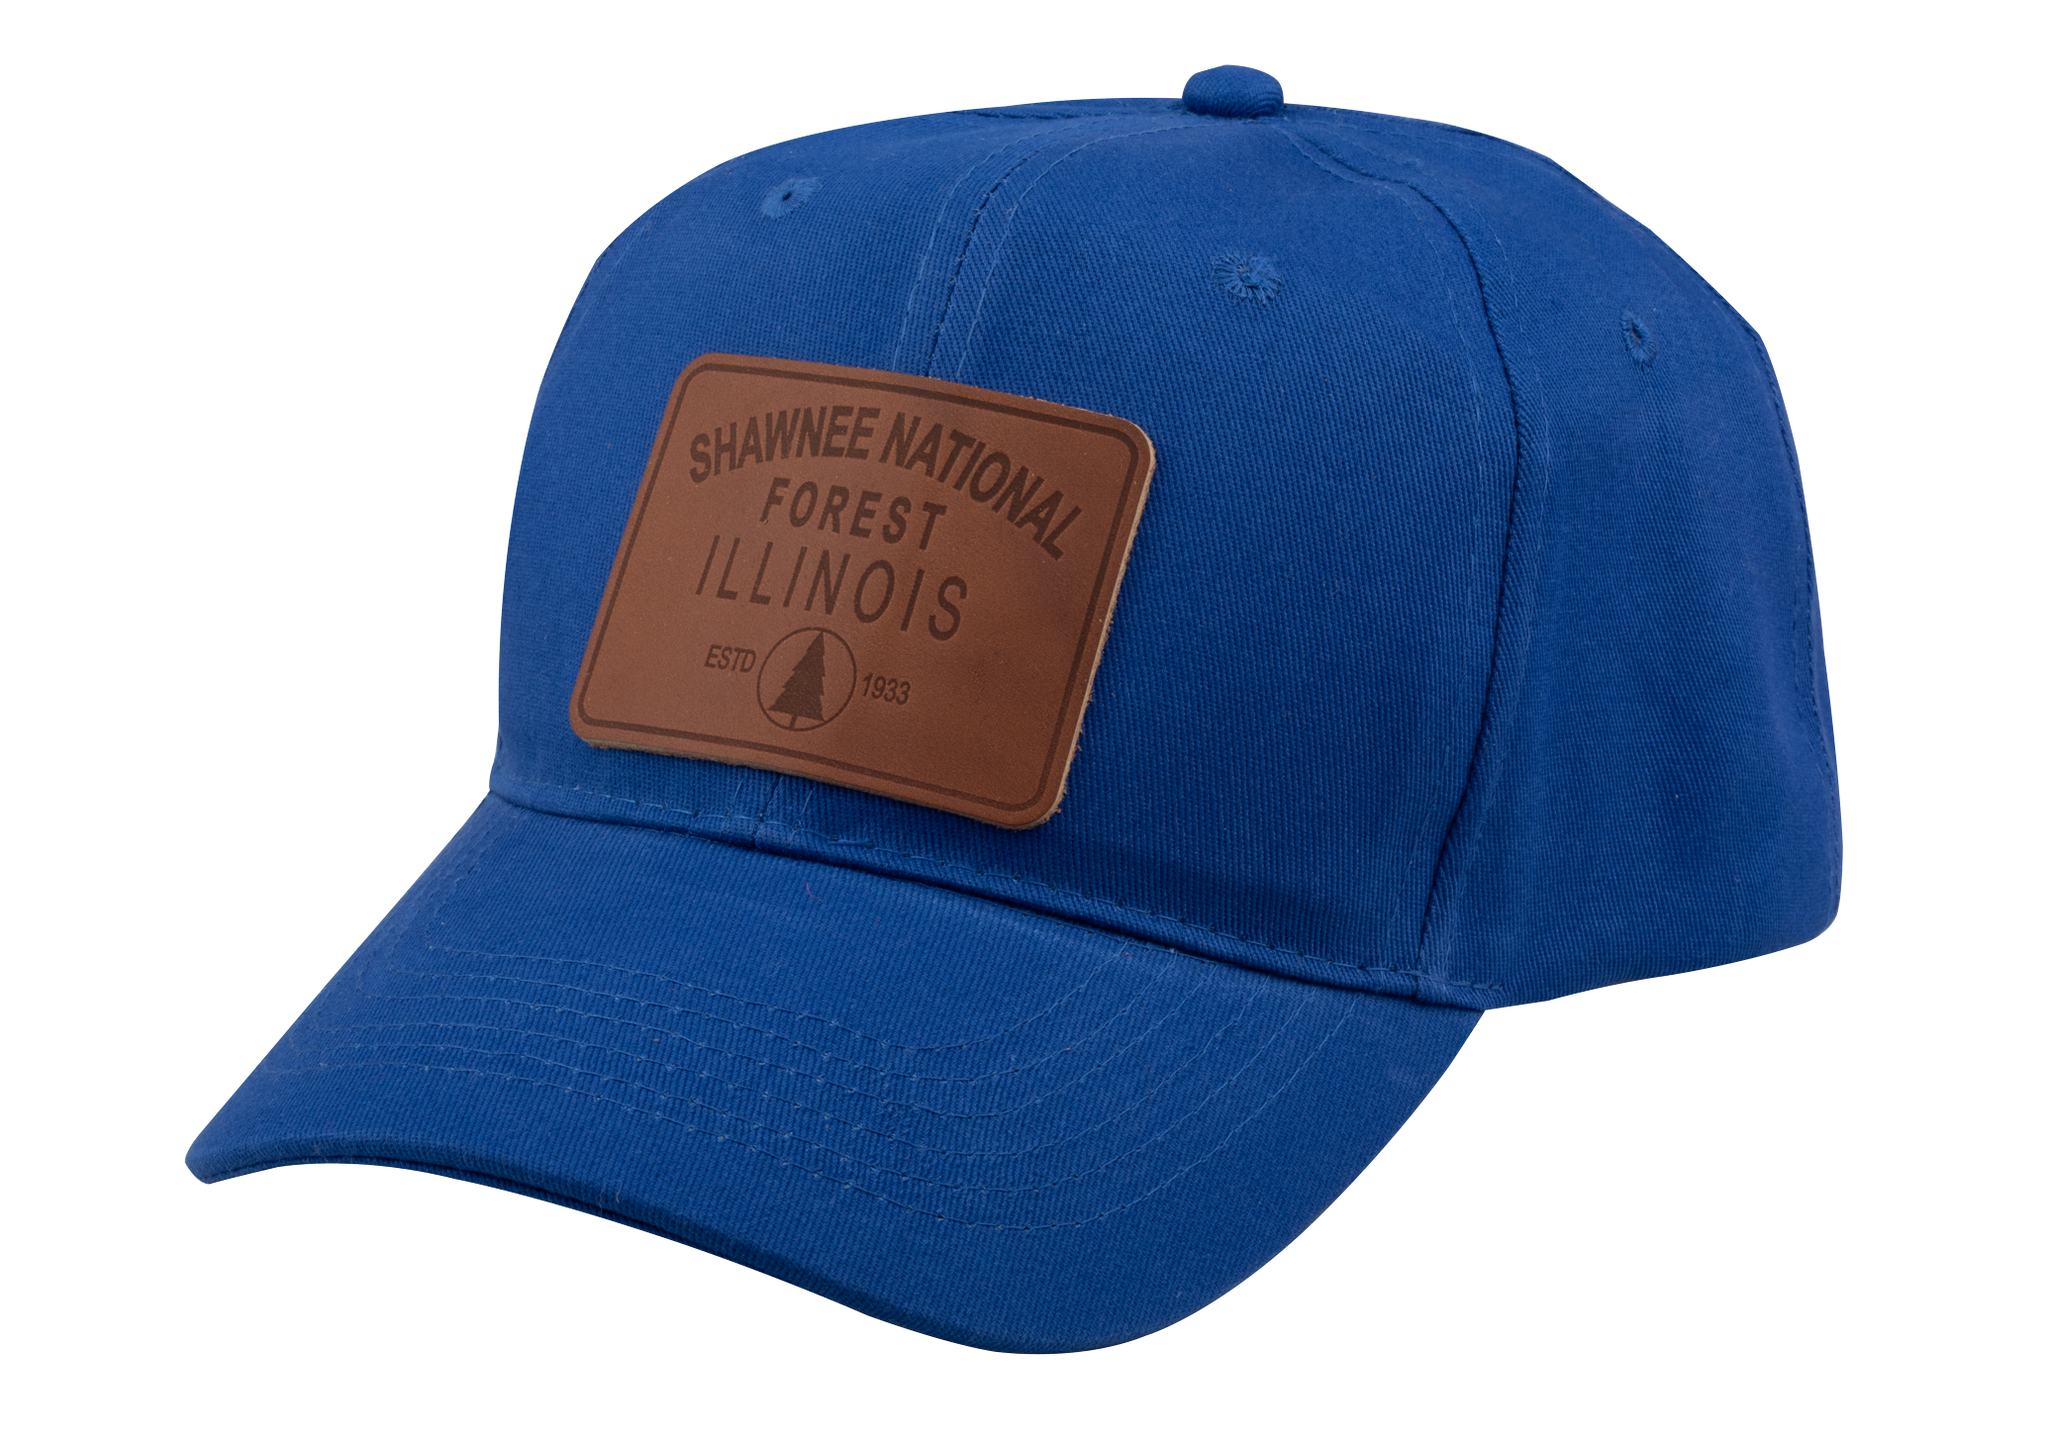 Ball Cap with Shawnee National Forest Leather Patch